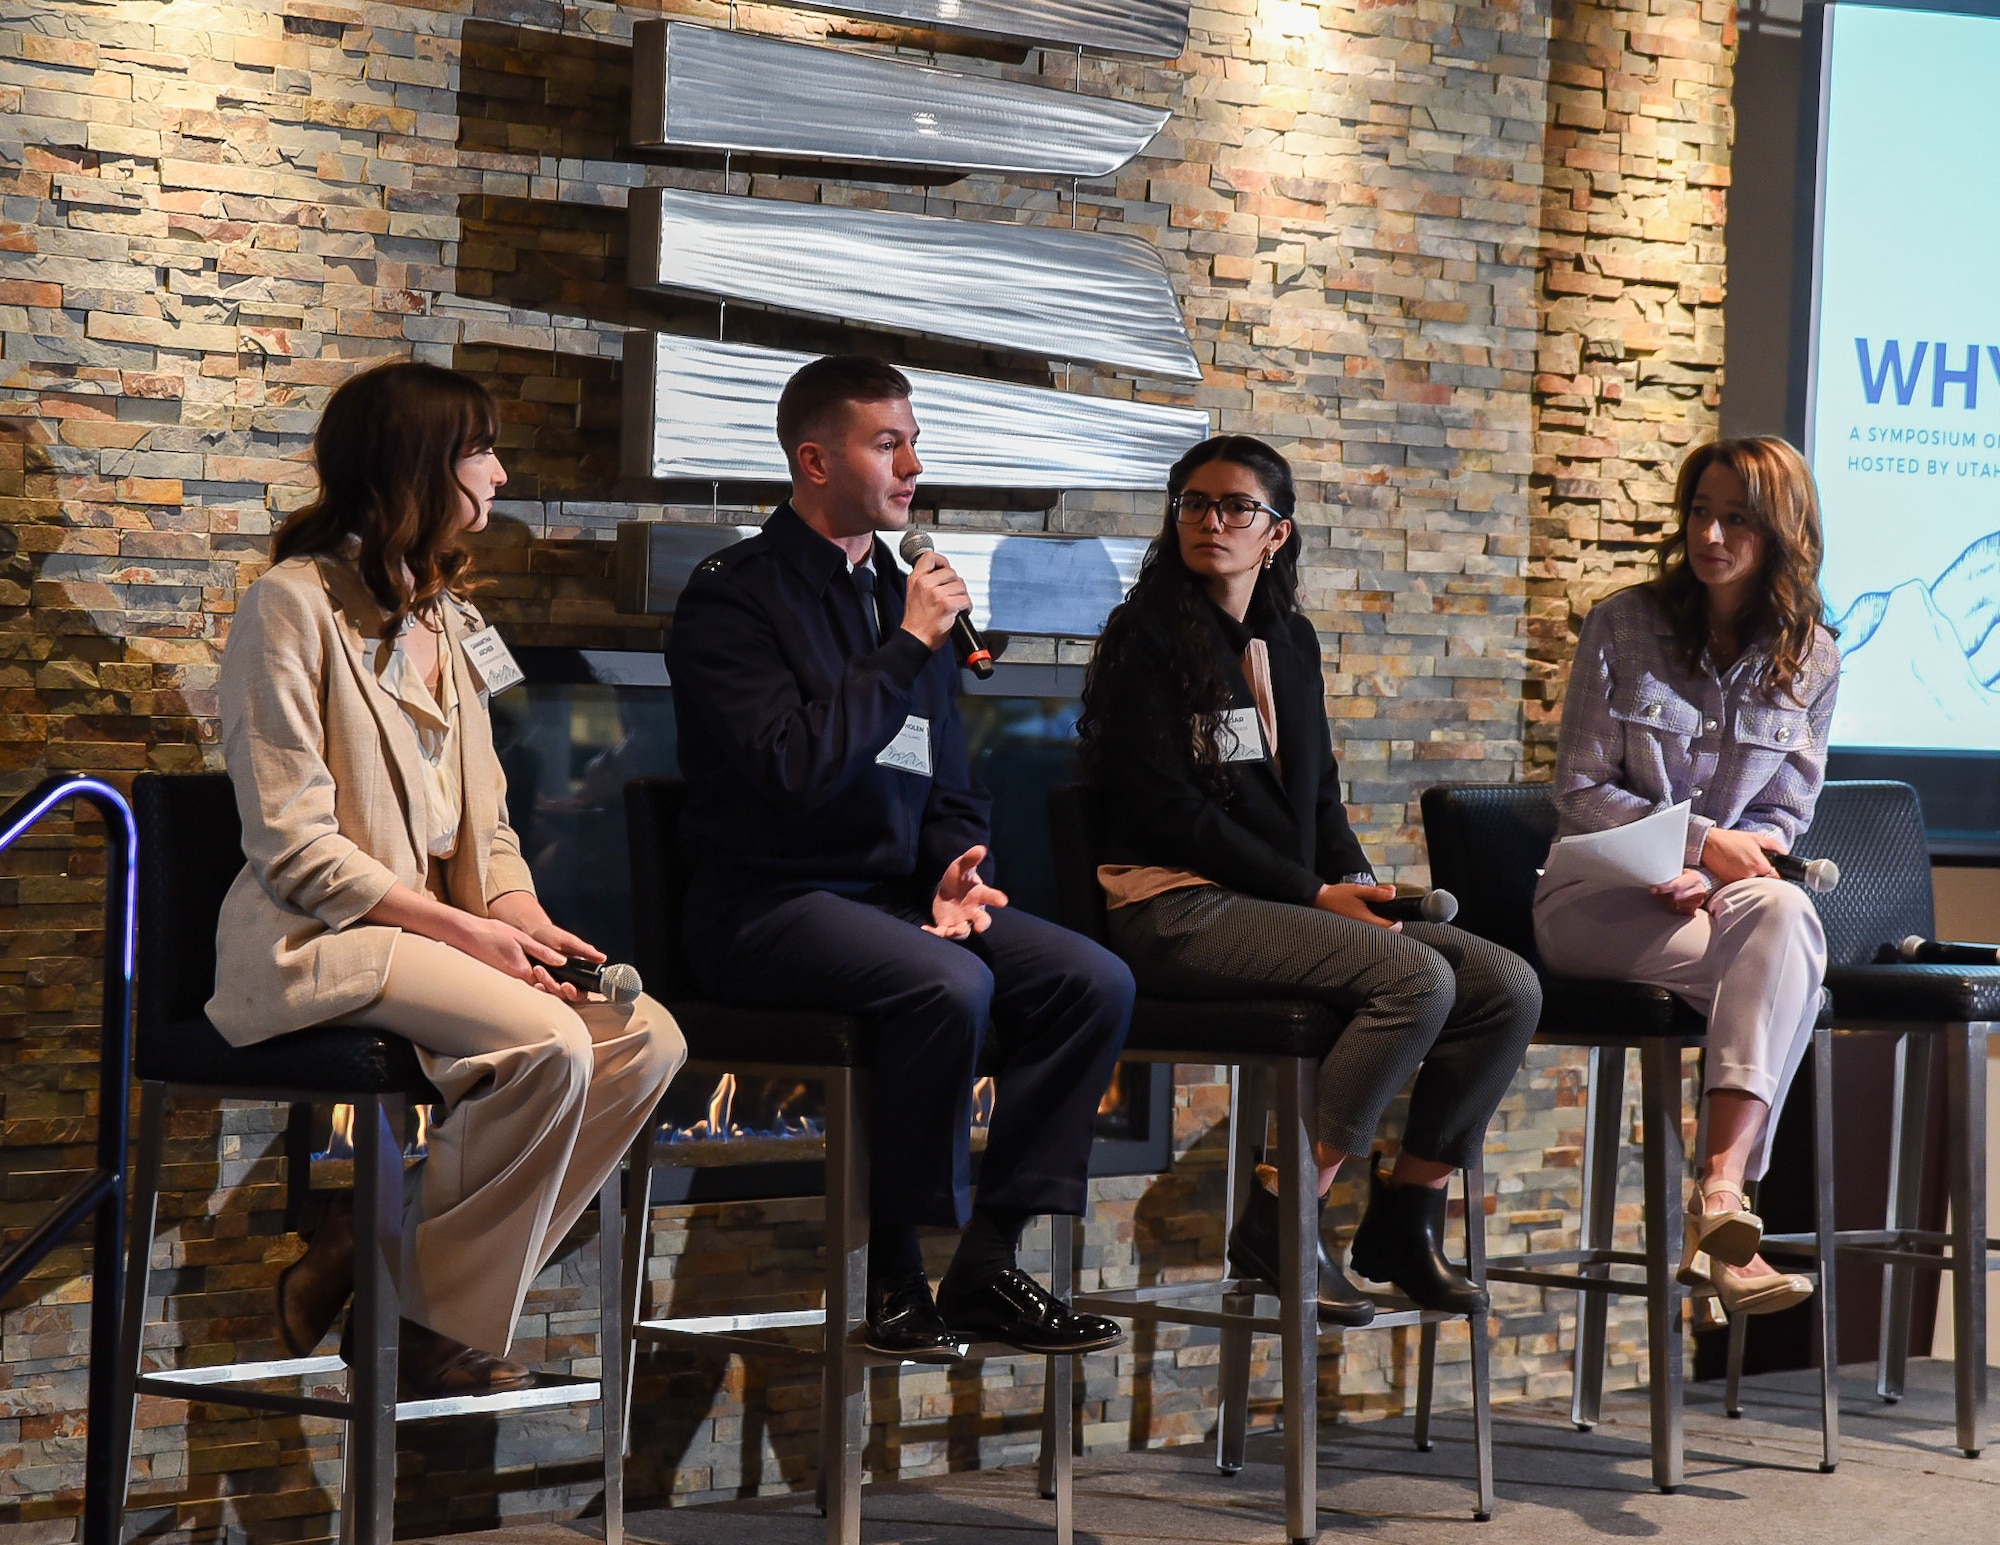 Leading the symposium's first panel, Cox was joined by Capt. Landon Tholen, Samantha Archer, and Ruby Vejar, who brought diverse perspectives to the table, illuminating the motivations propelling the youth's dedication to service and volunteerism.